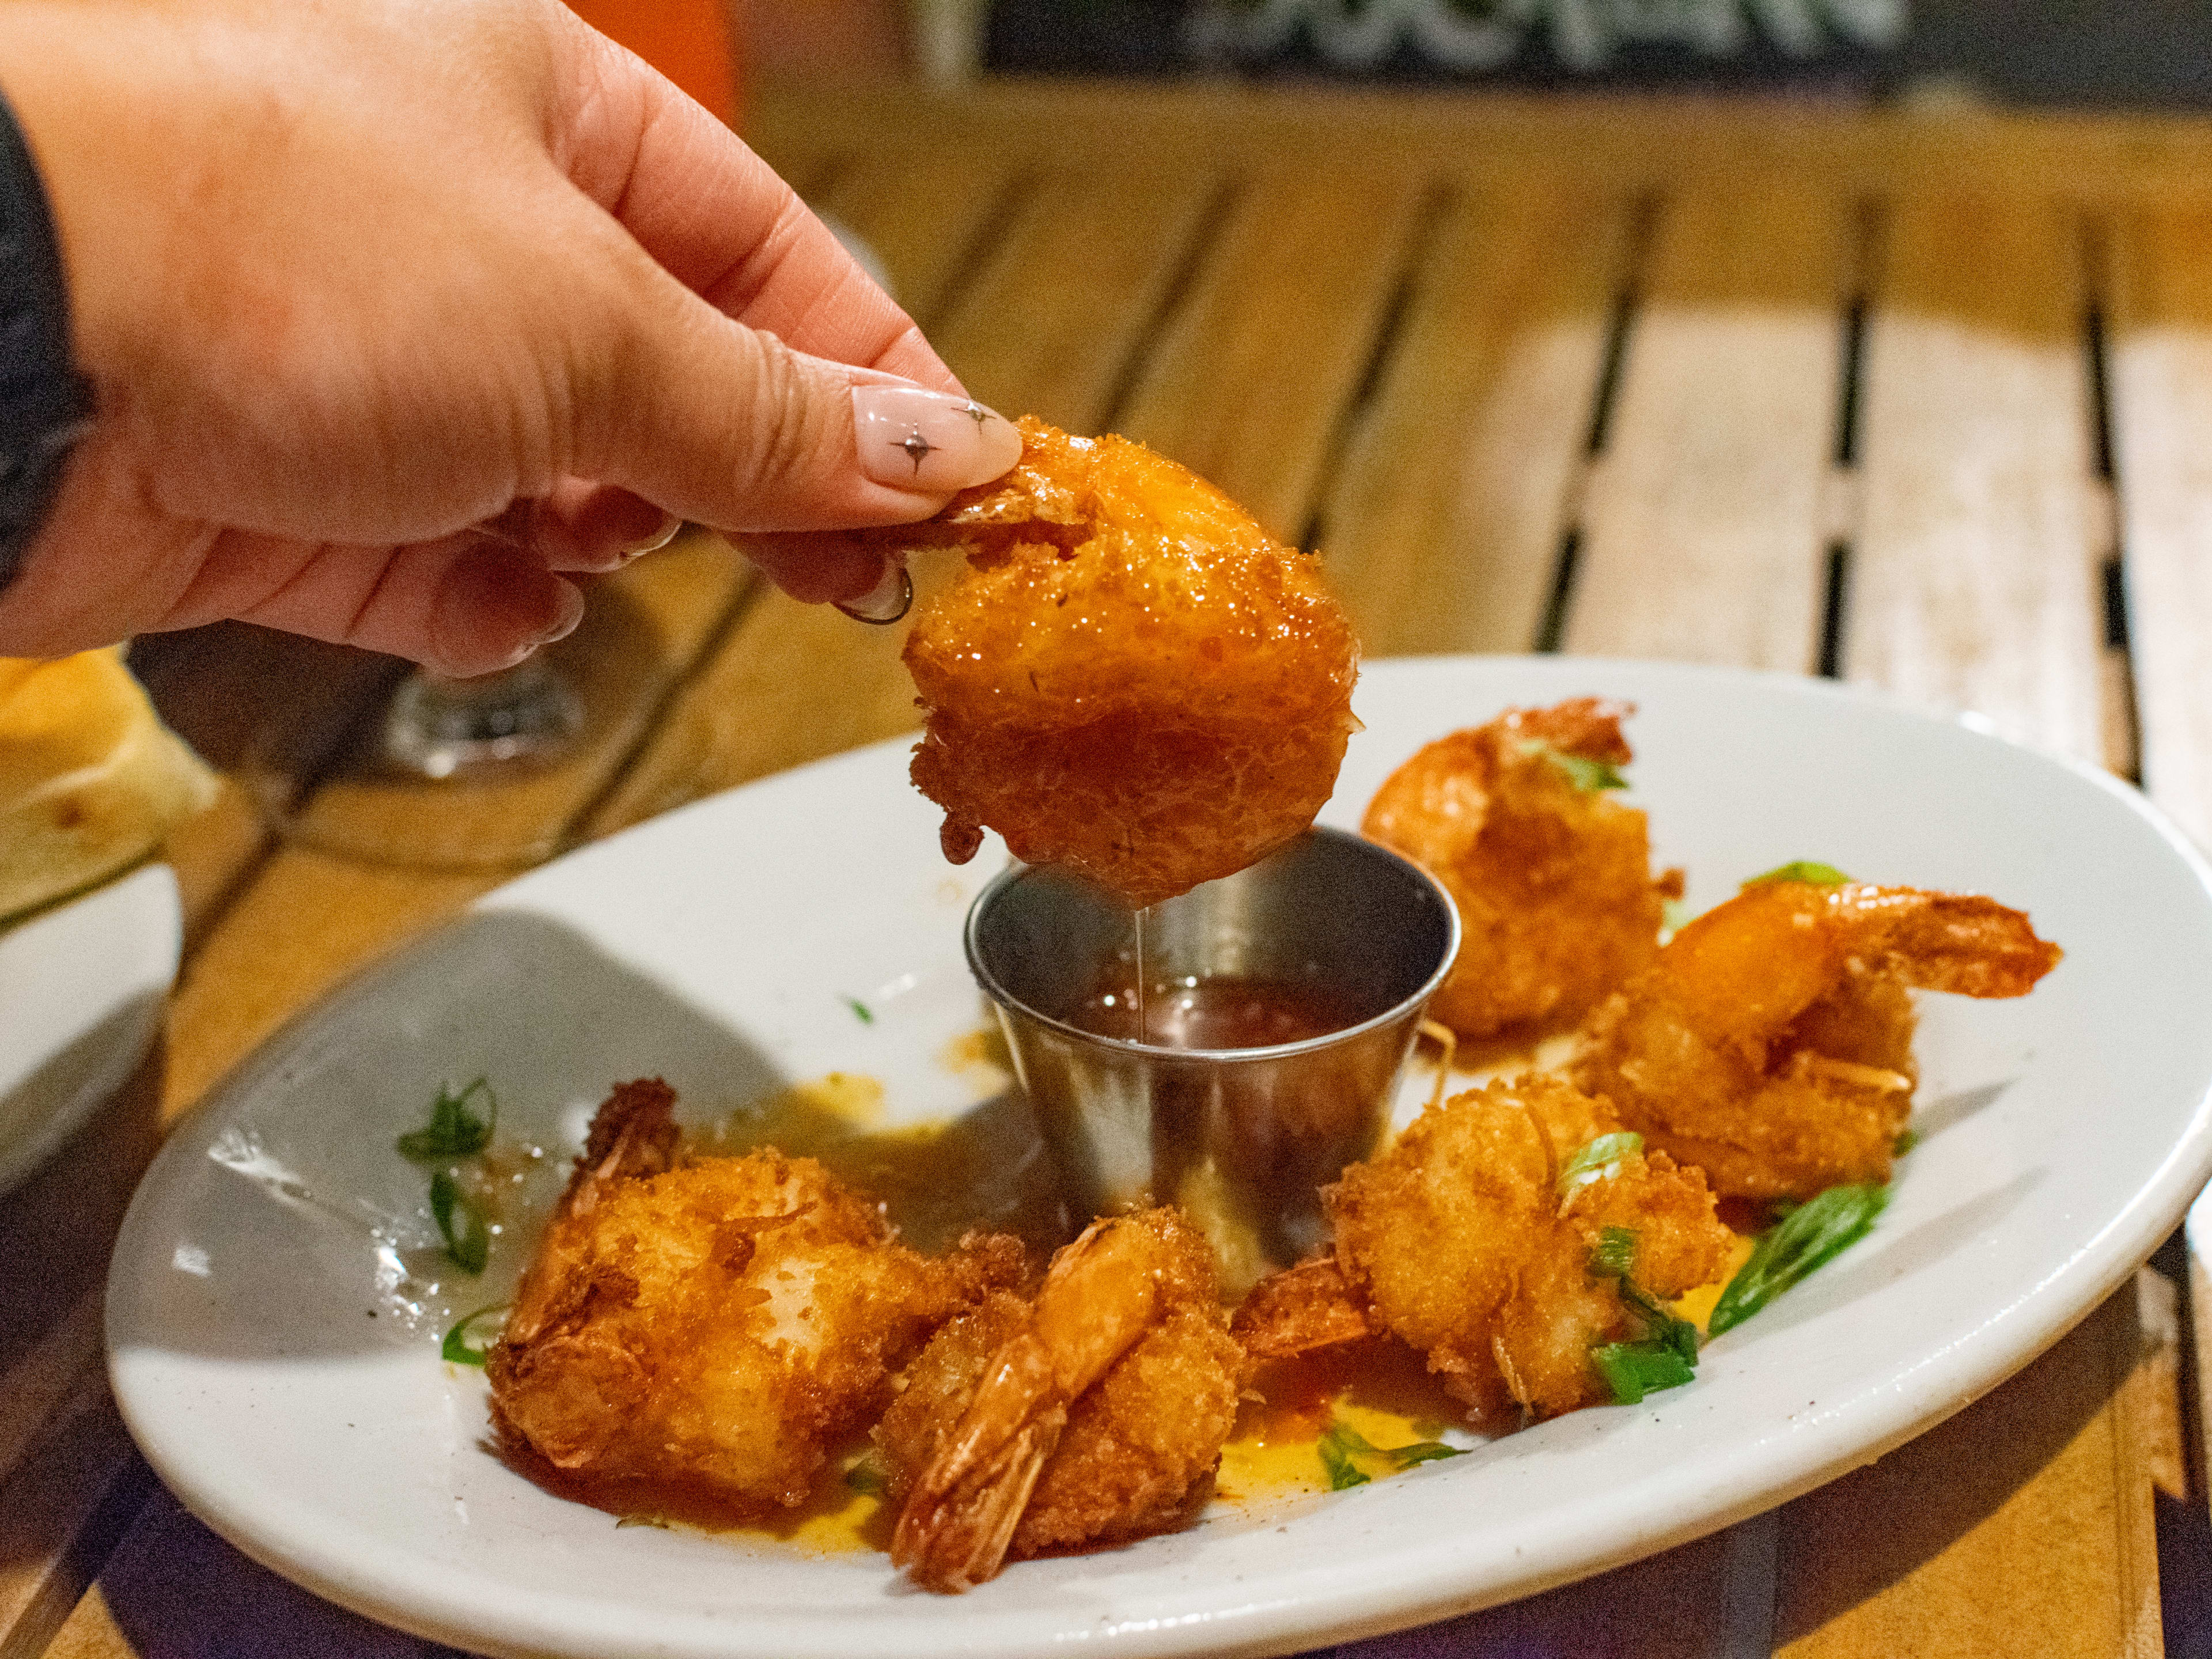 Coconut shrimp at The Boathouse in Disney Springs